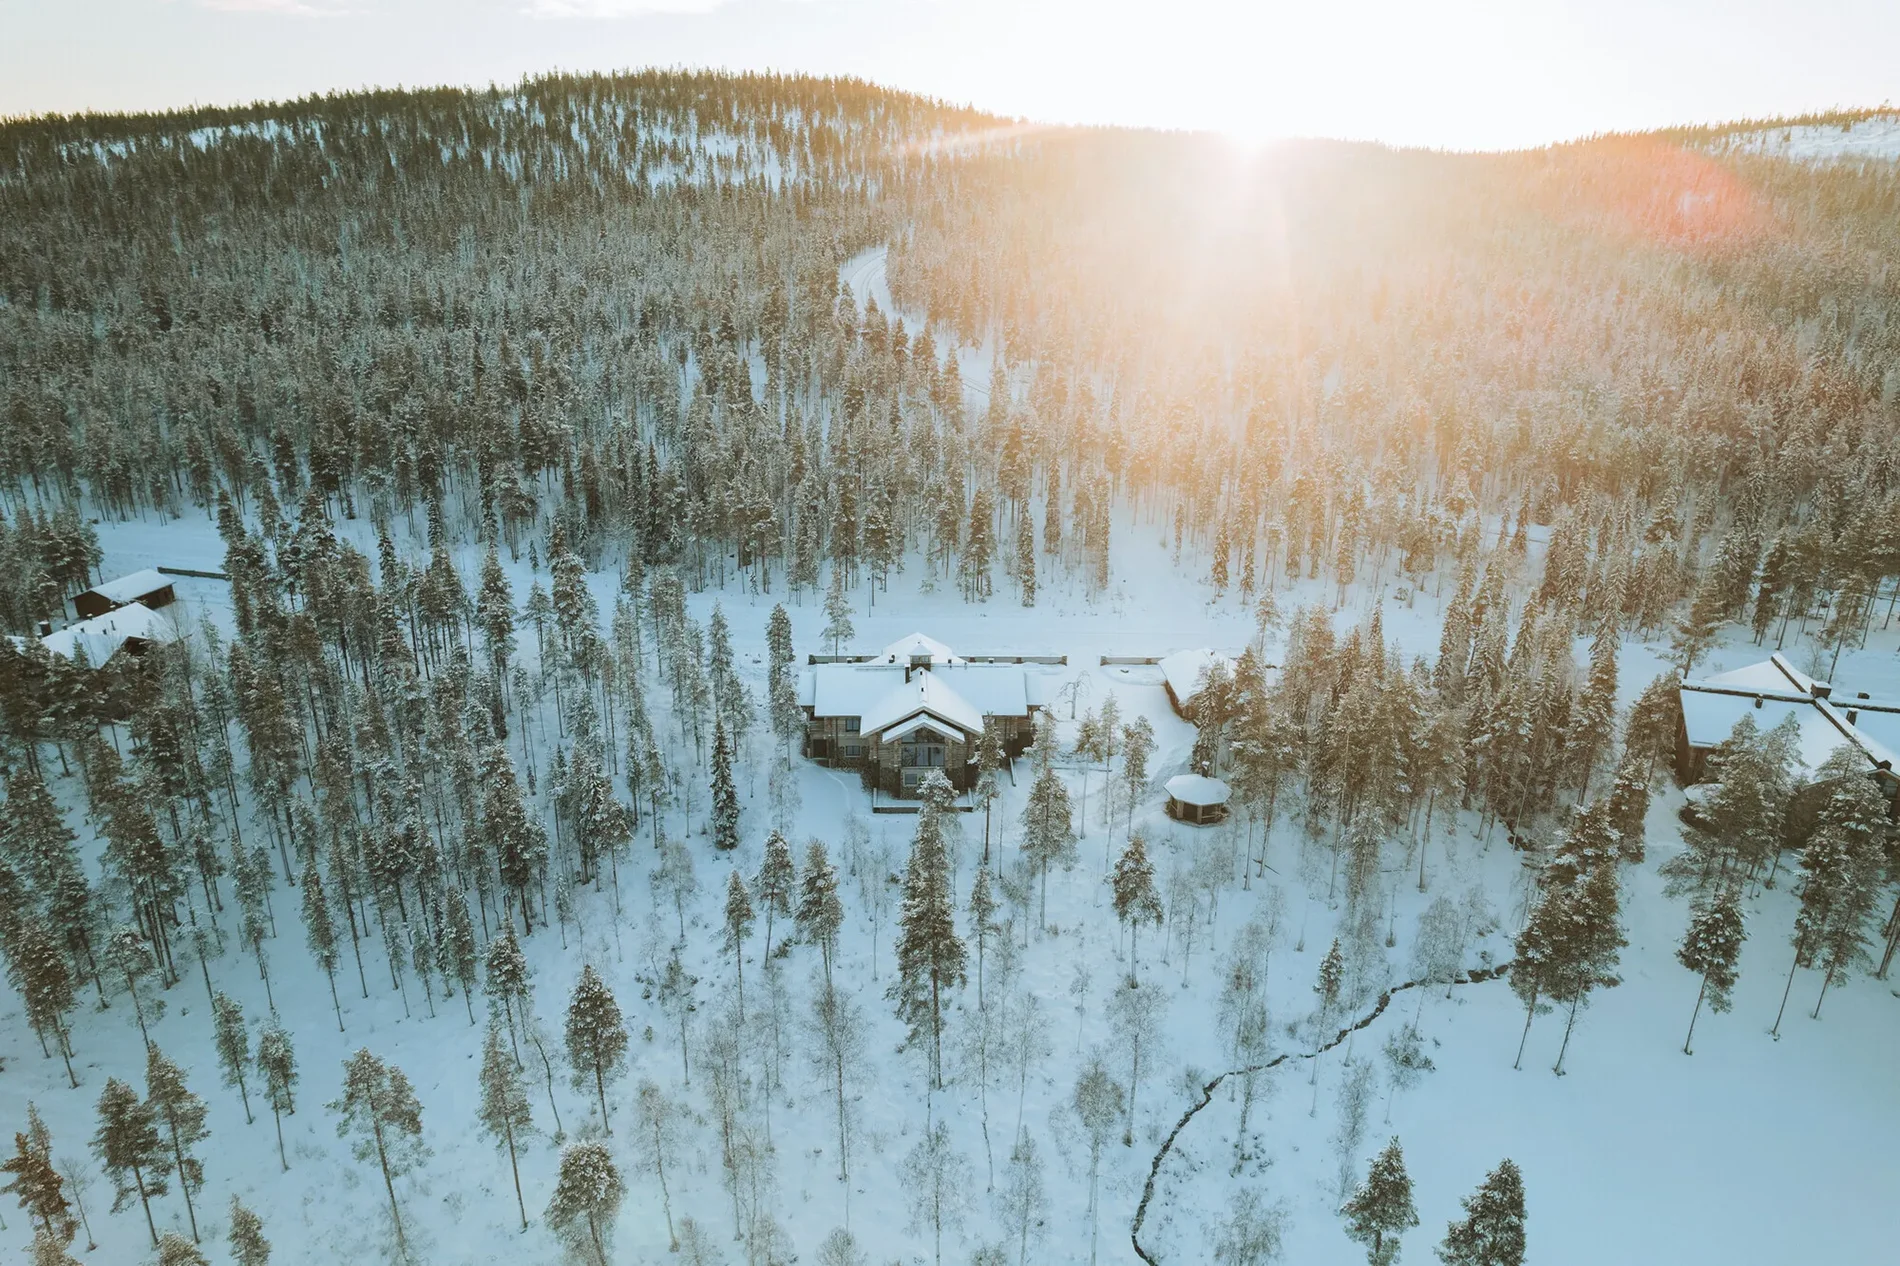 Investing in Lapland: Exclusive Real Estate Opportunities in a Rapidly Growing Region